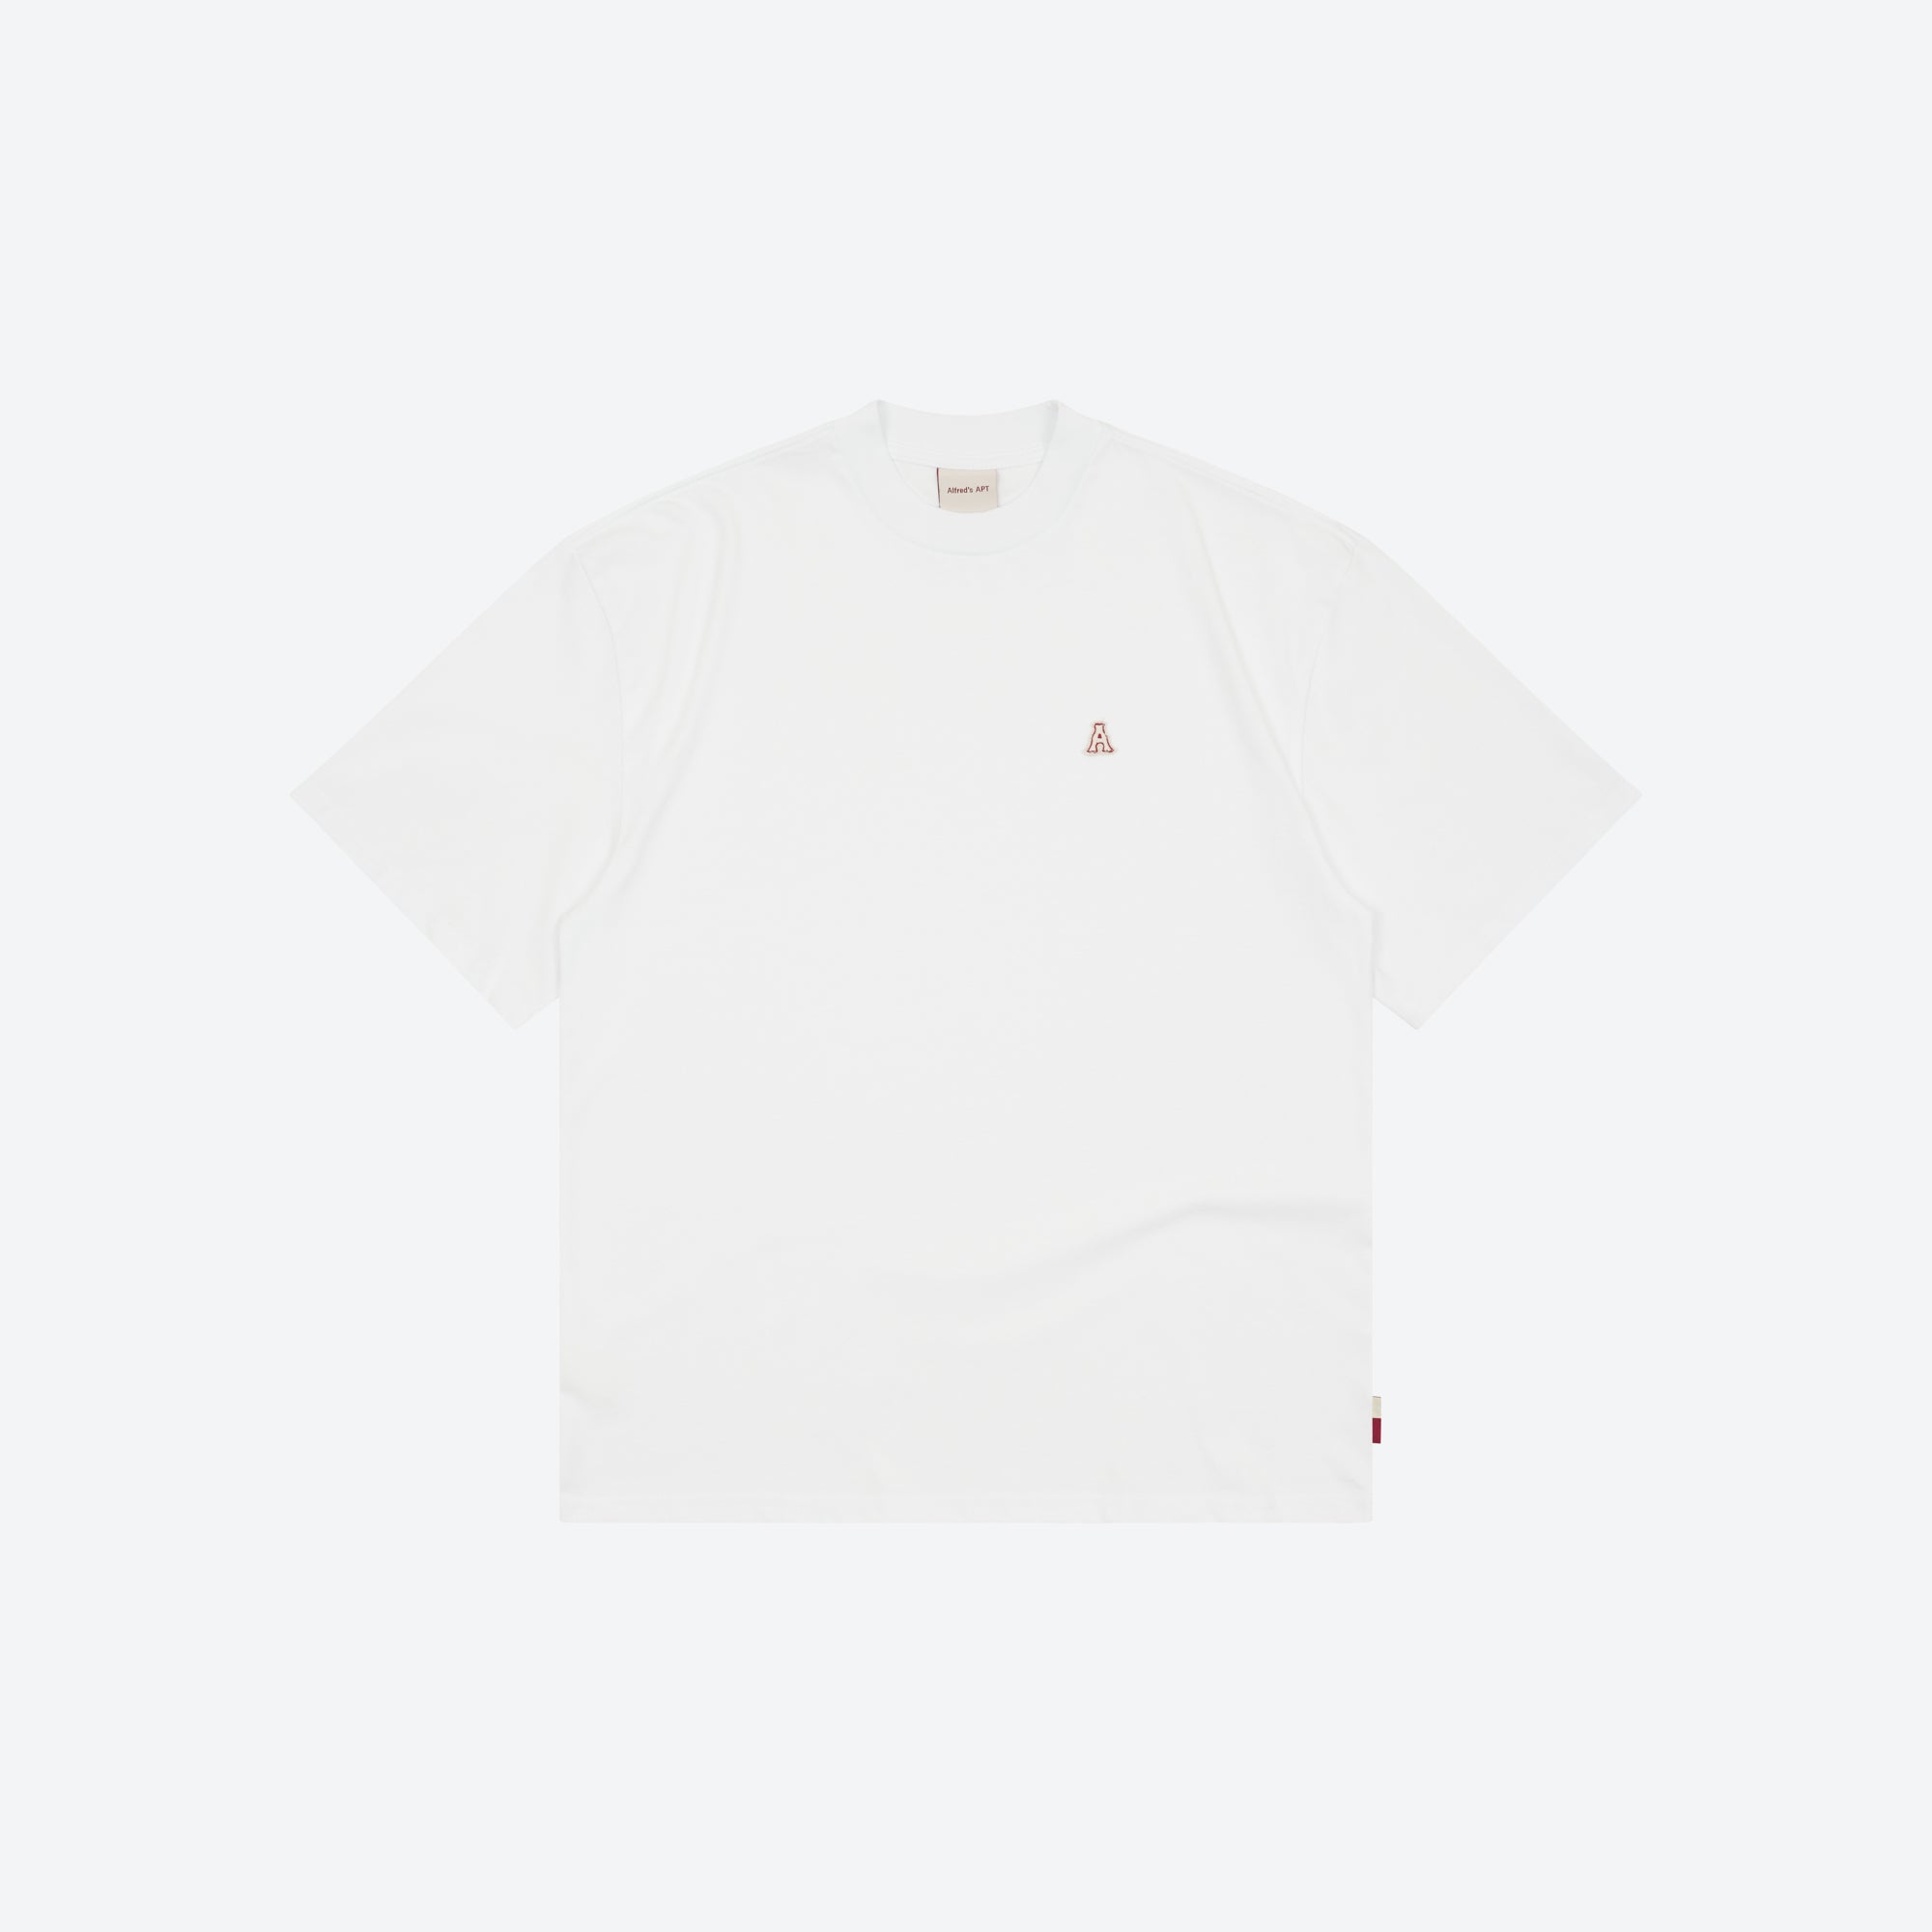 Alfred's Apartment - Capital Tee - White